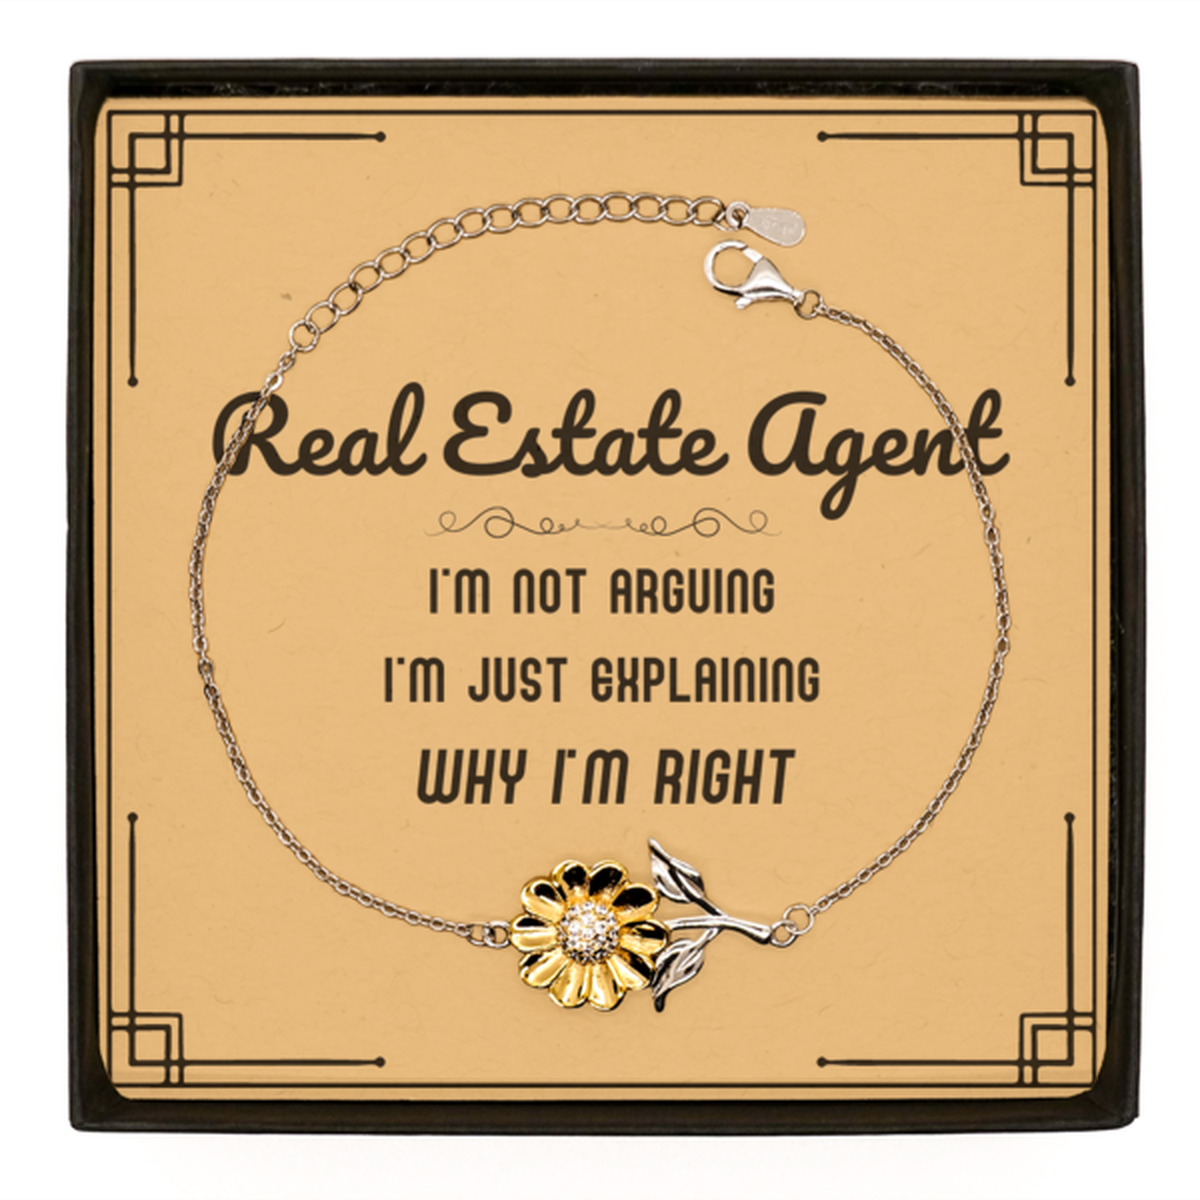 Real Estate Agent I'm not Arguing. I'm Just Explaining Why I'm RIGHT Sunflower Bracelet, Funny Saying Quote Real Estate Agent Gifts For Real Estate Agent Message Card Graduation Birthday Christmas Gifts for Men Women Coworker